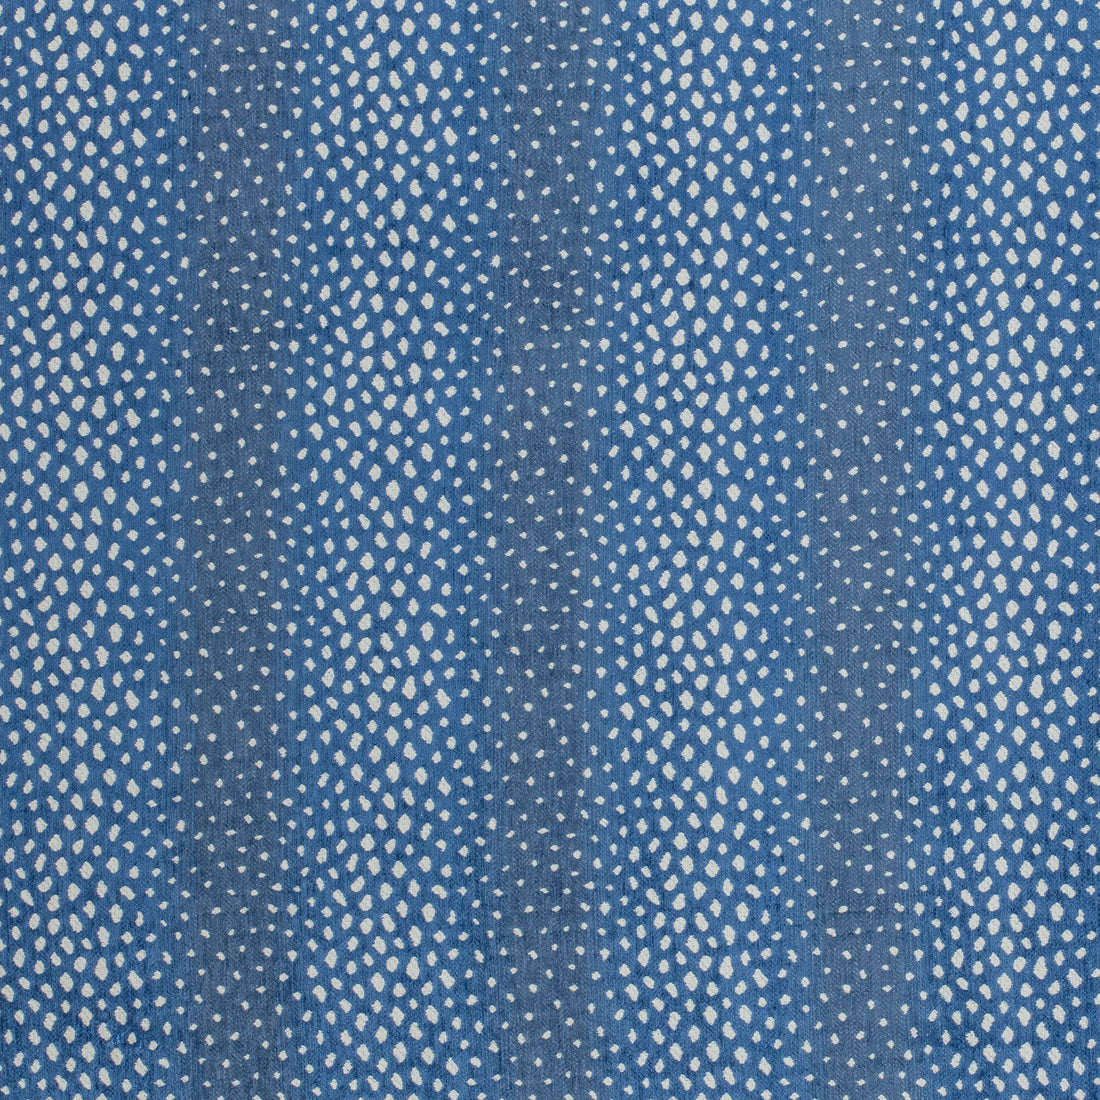 Gazelle fabric in blue color - pattern number W80432 - by Thibaut in the Woven Resource Vol 10 Menagerie collection